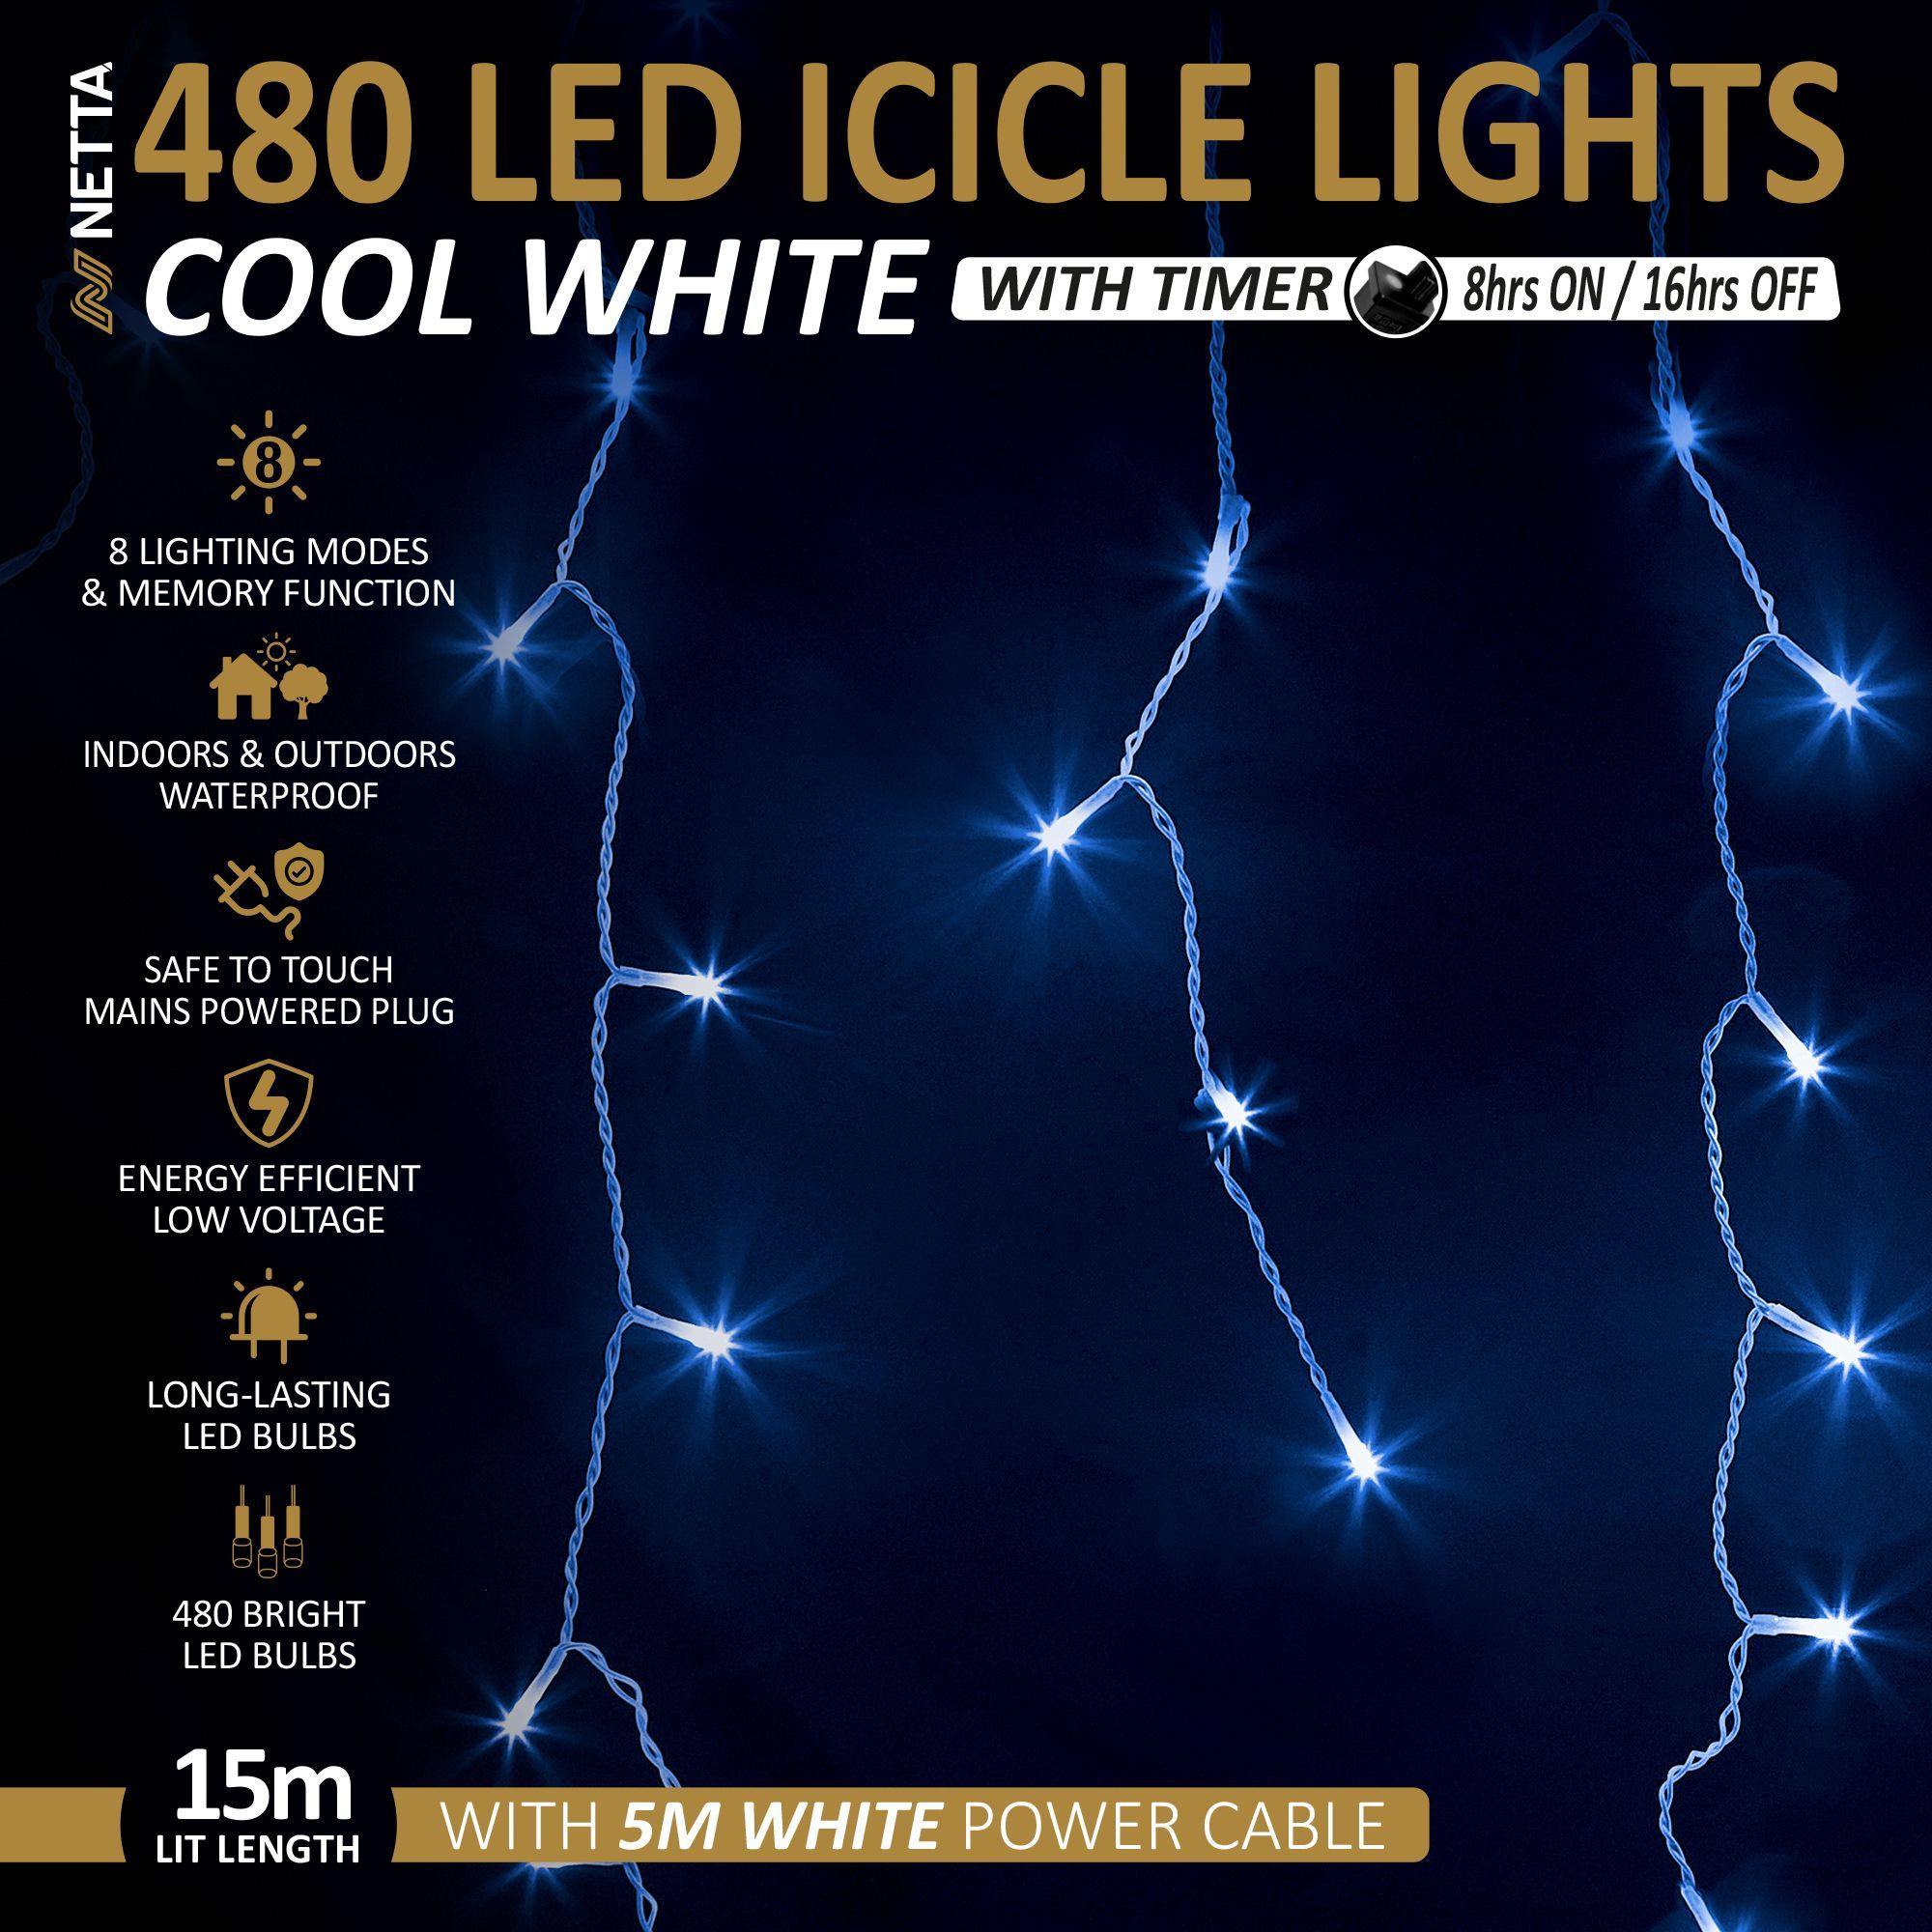 NETTA Icicle Lights 480 LED Outdoor Christmas Lights 15M Lit Length, Timer - Cool White, with White Cable